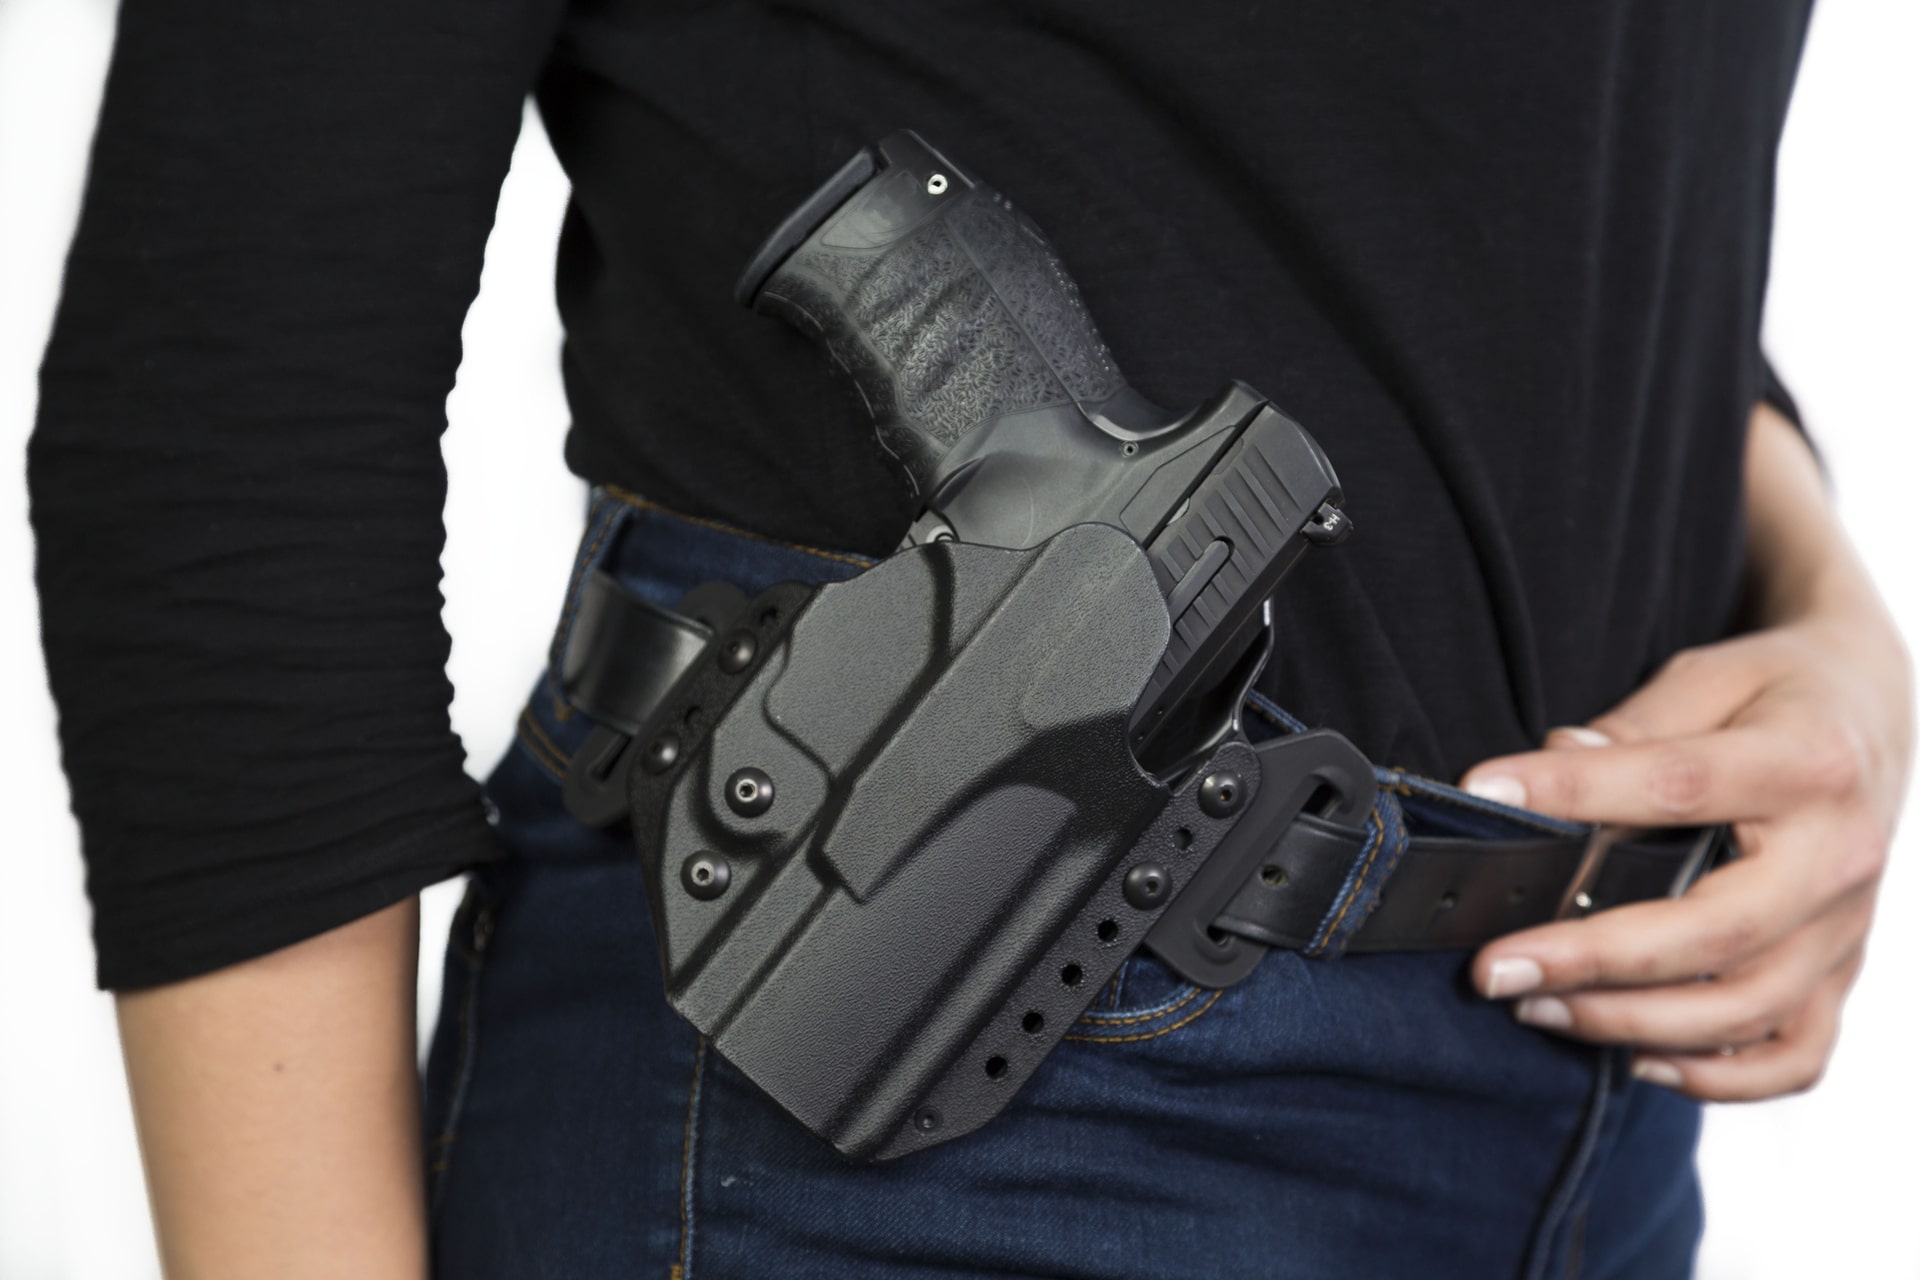 New gun holsters for women can be worn as garters or on your bra - ABC13  Houston